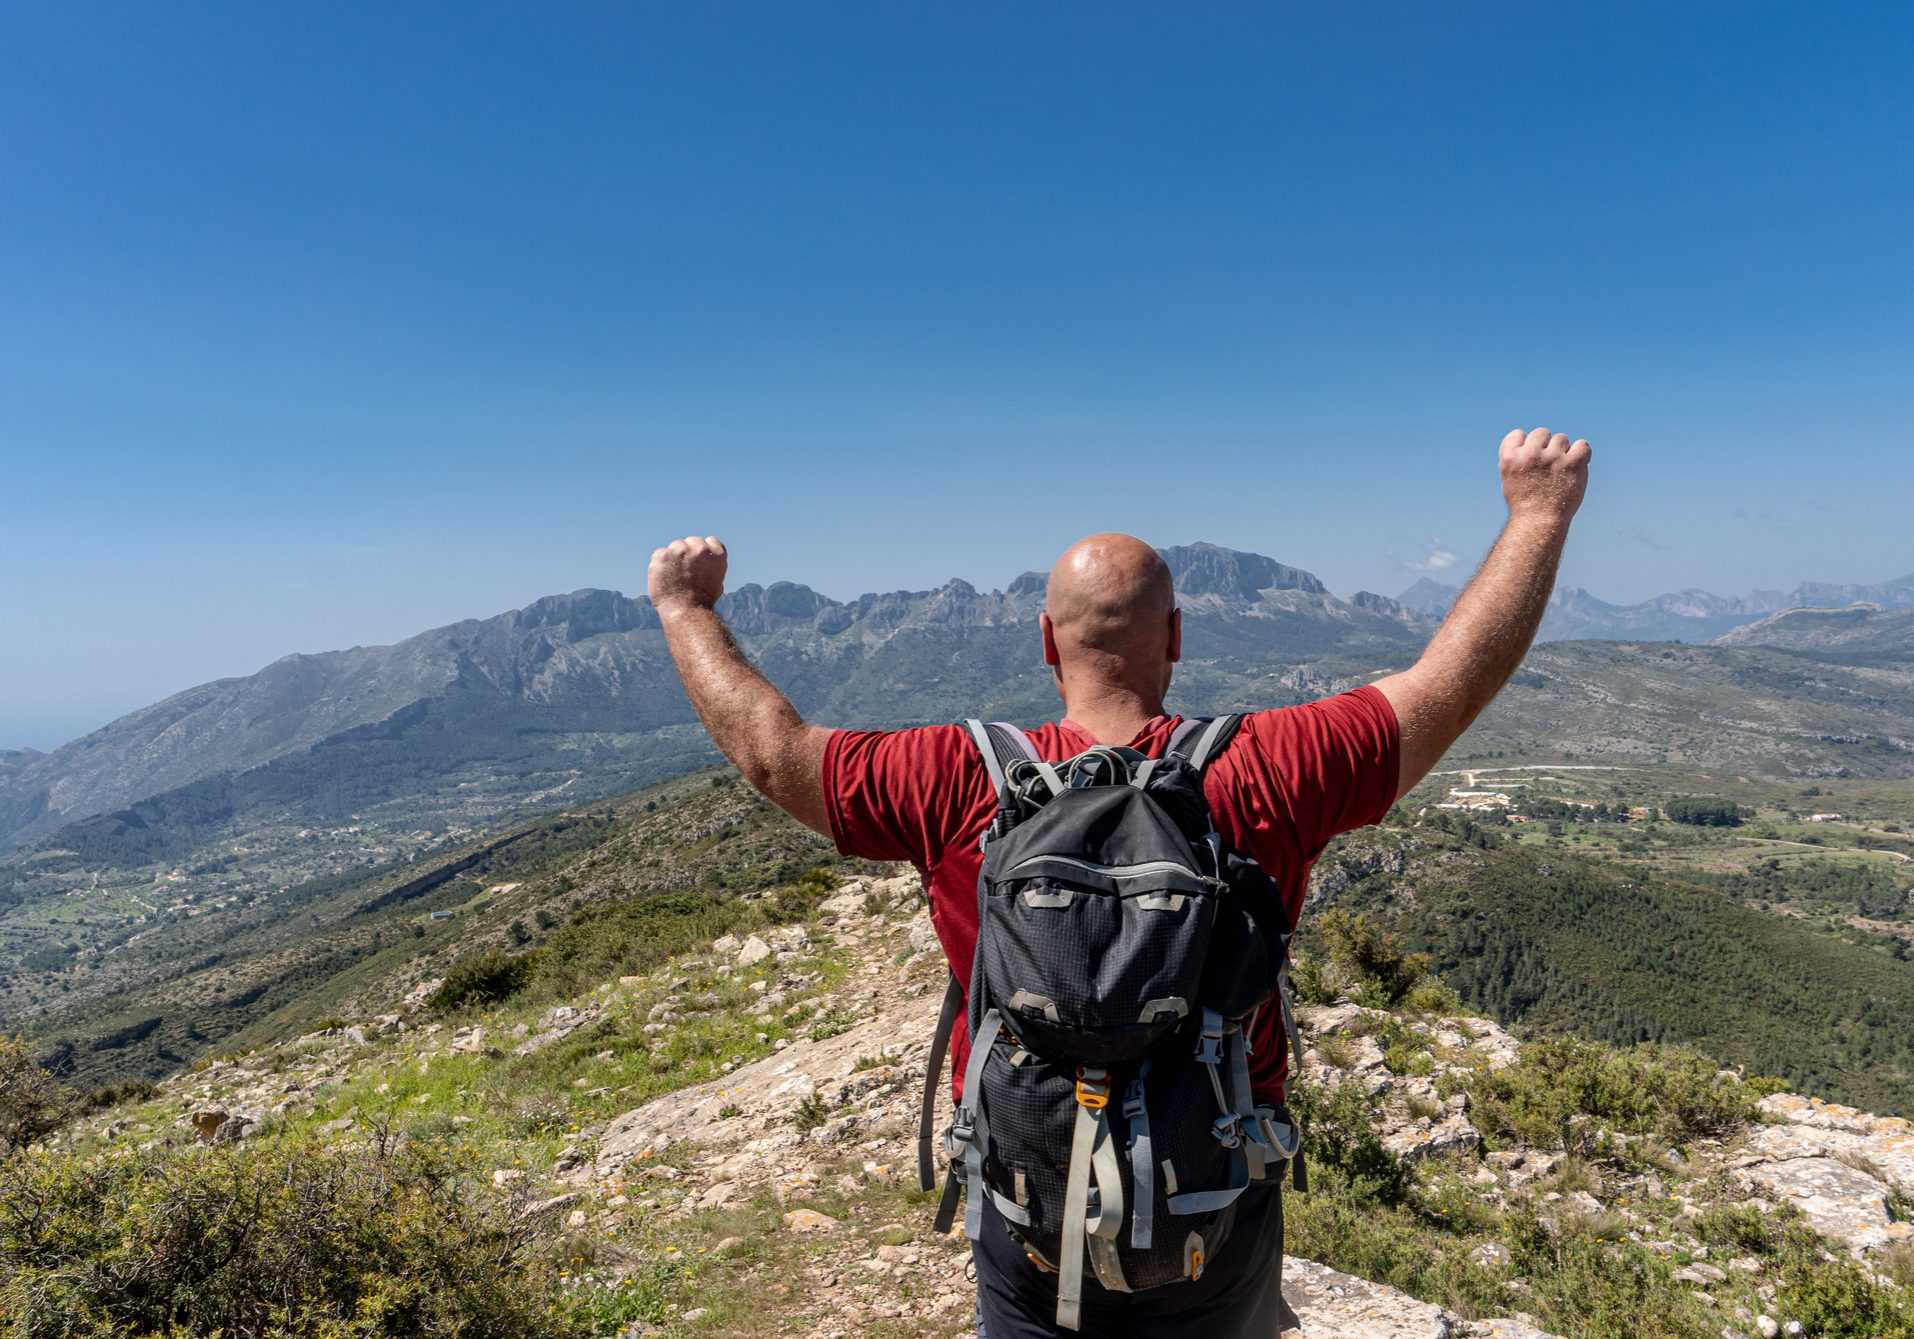 Rear view of a male hiker with his arms raised, with a gesture of happiness and success.